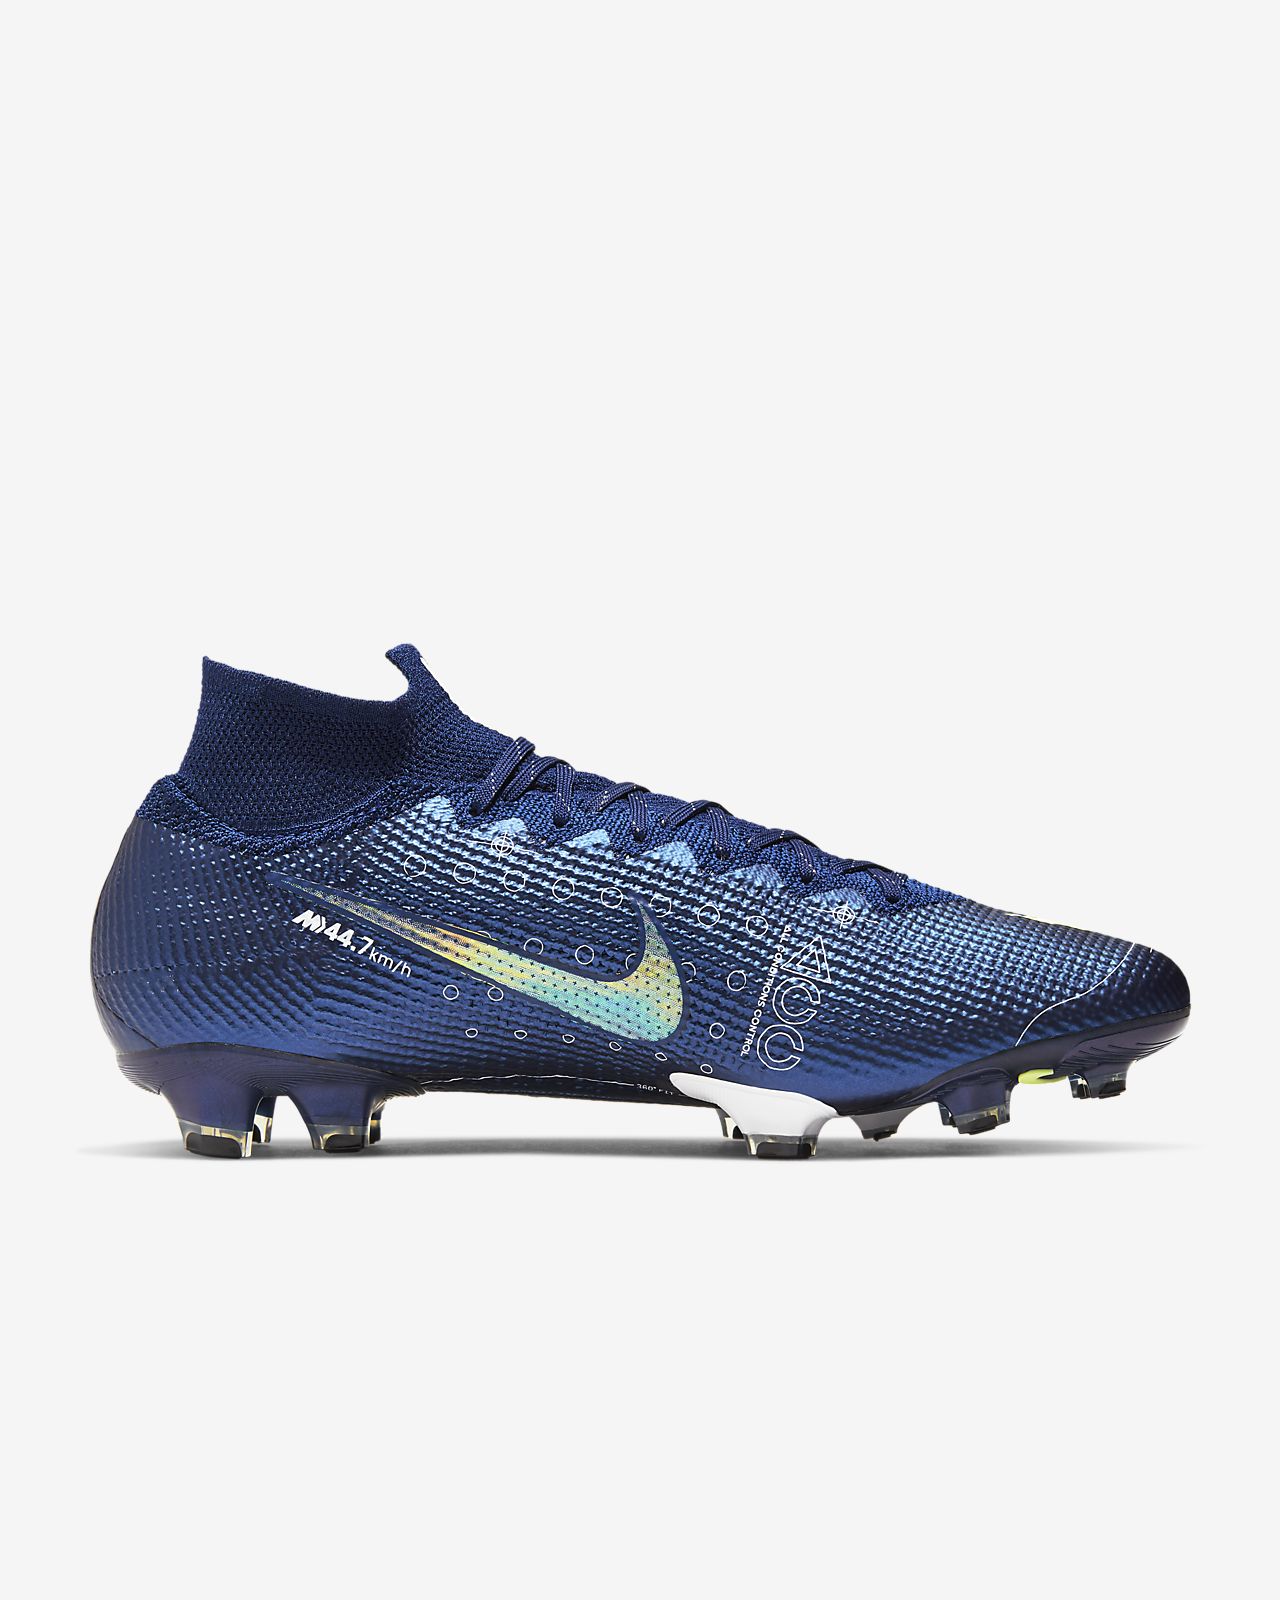 Nike JR. Mercurial Superfly 7 Academy TF 6 Youth US